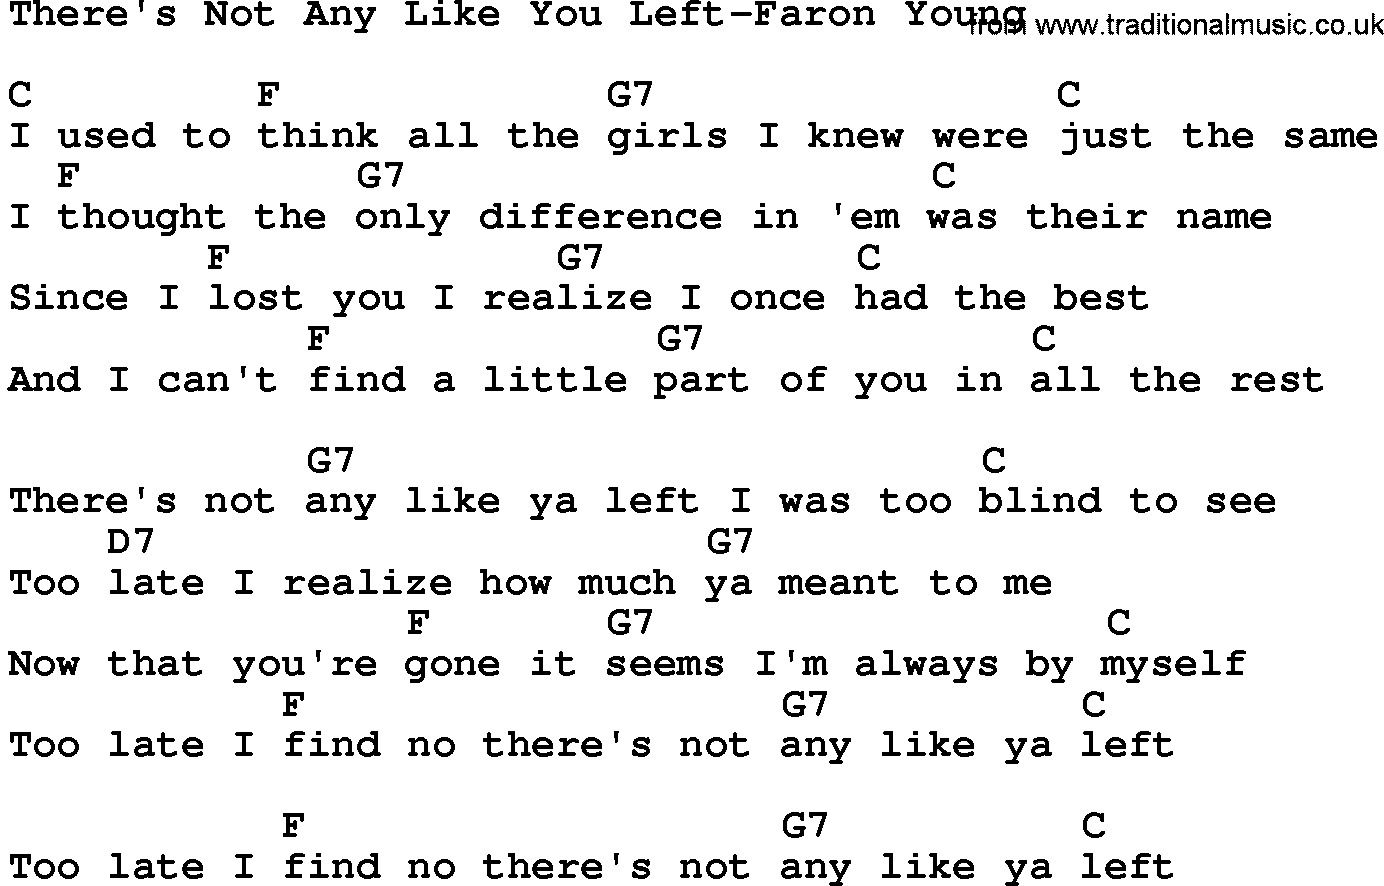 Country music song: There's Not Any Like You Left-Faron Young lyrics and chords